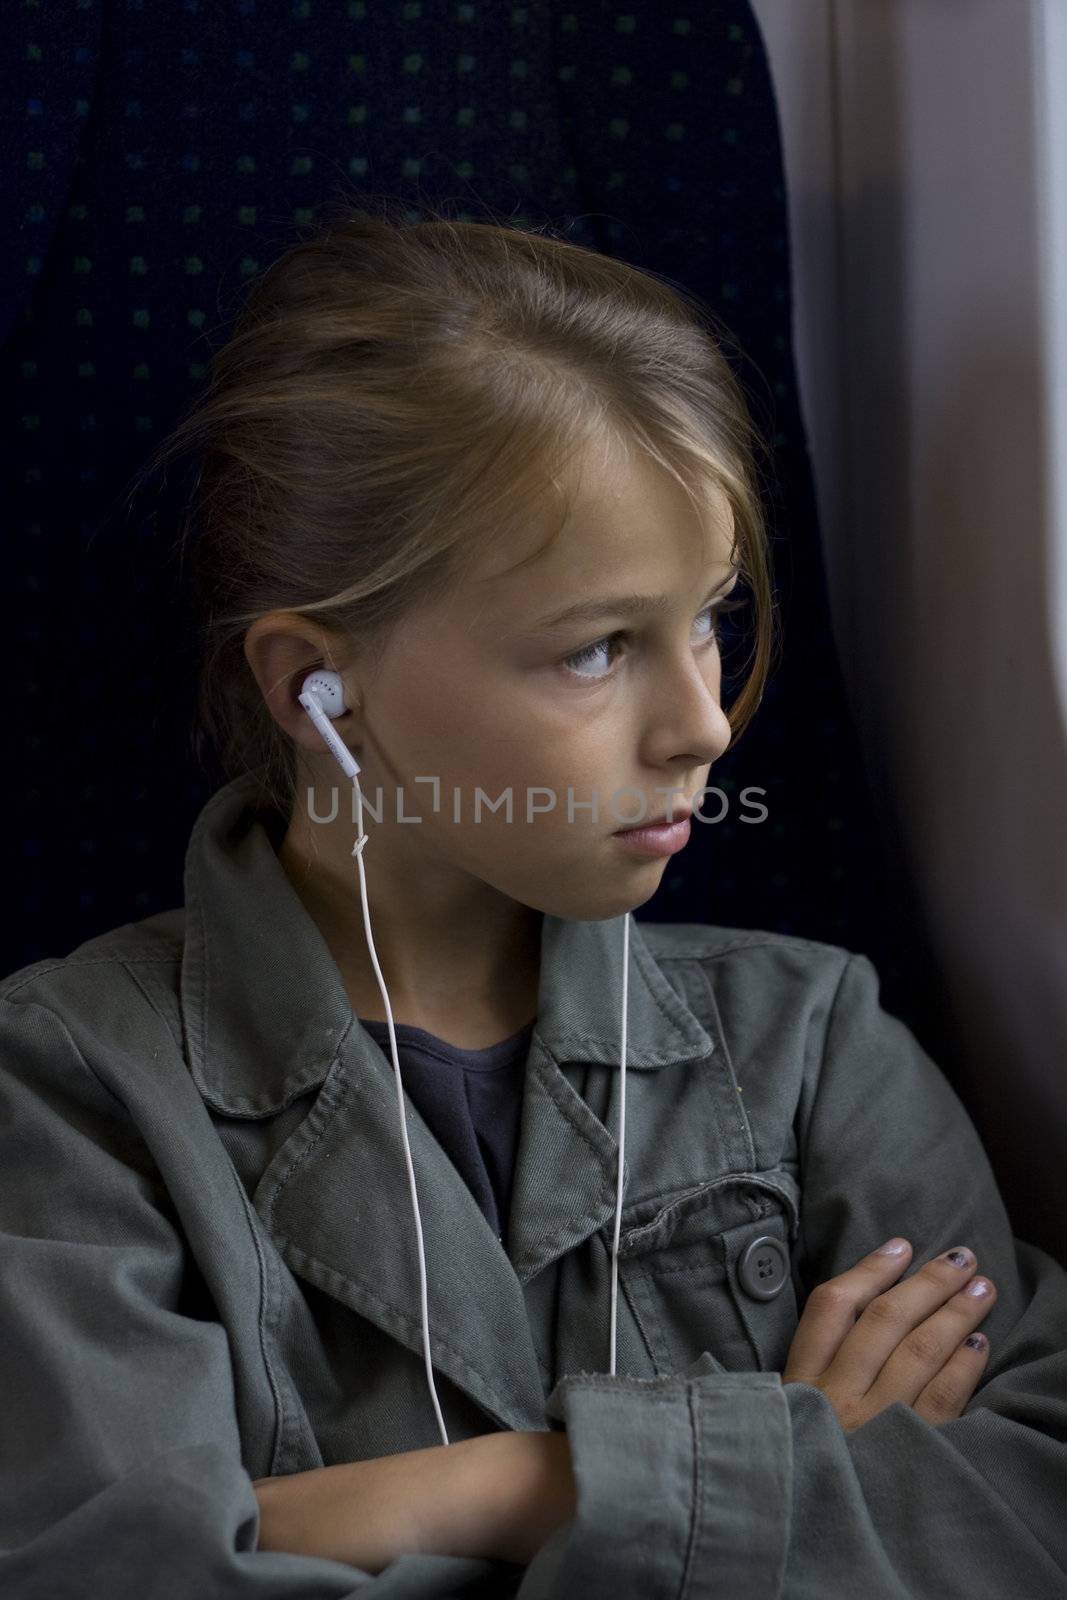 A young girl with headset sitting on a train, looking out of the window. 